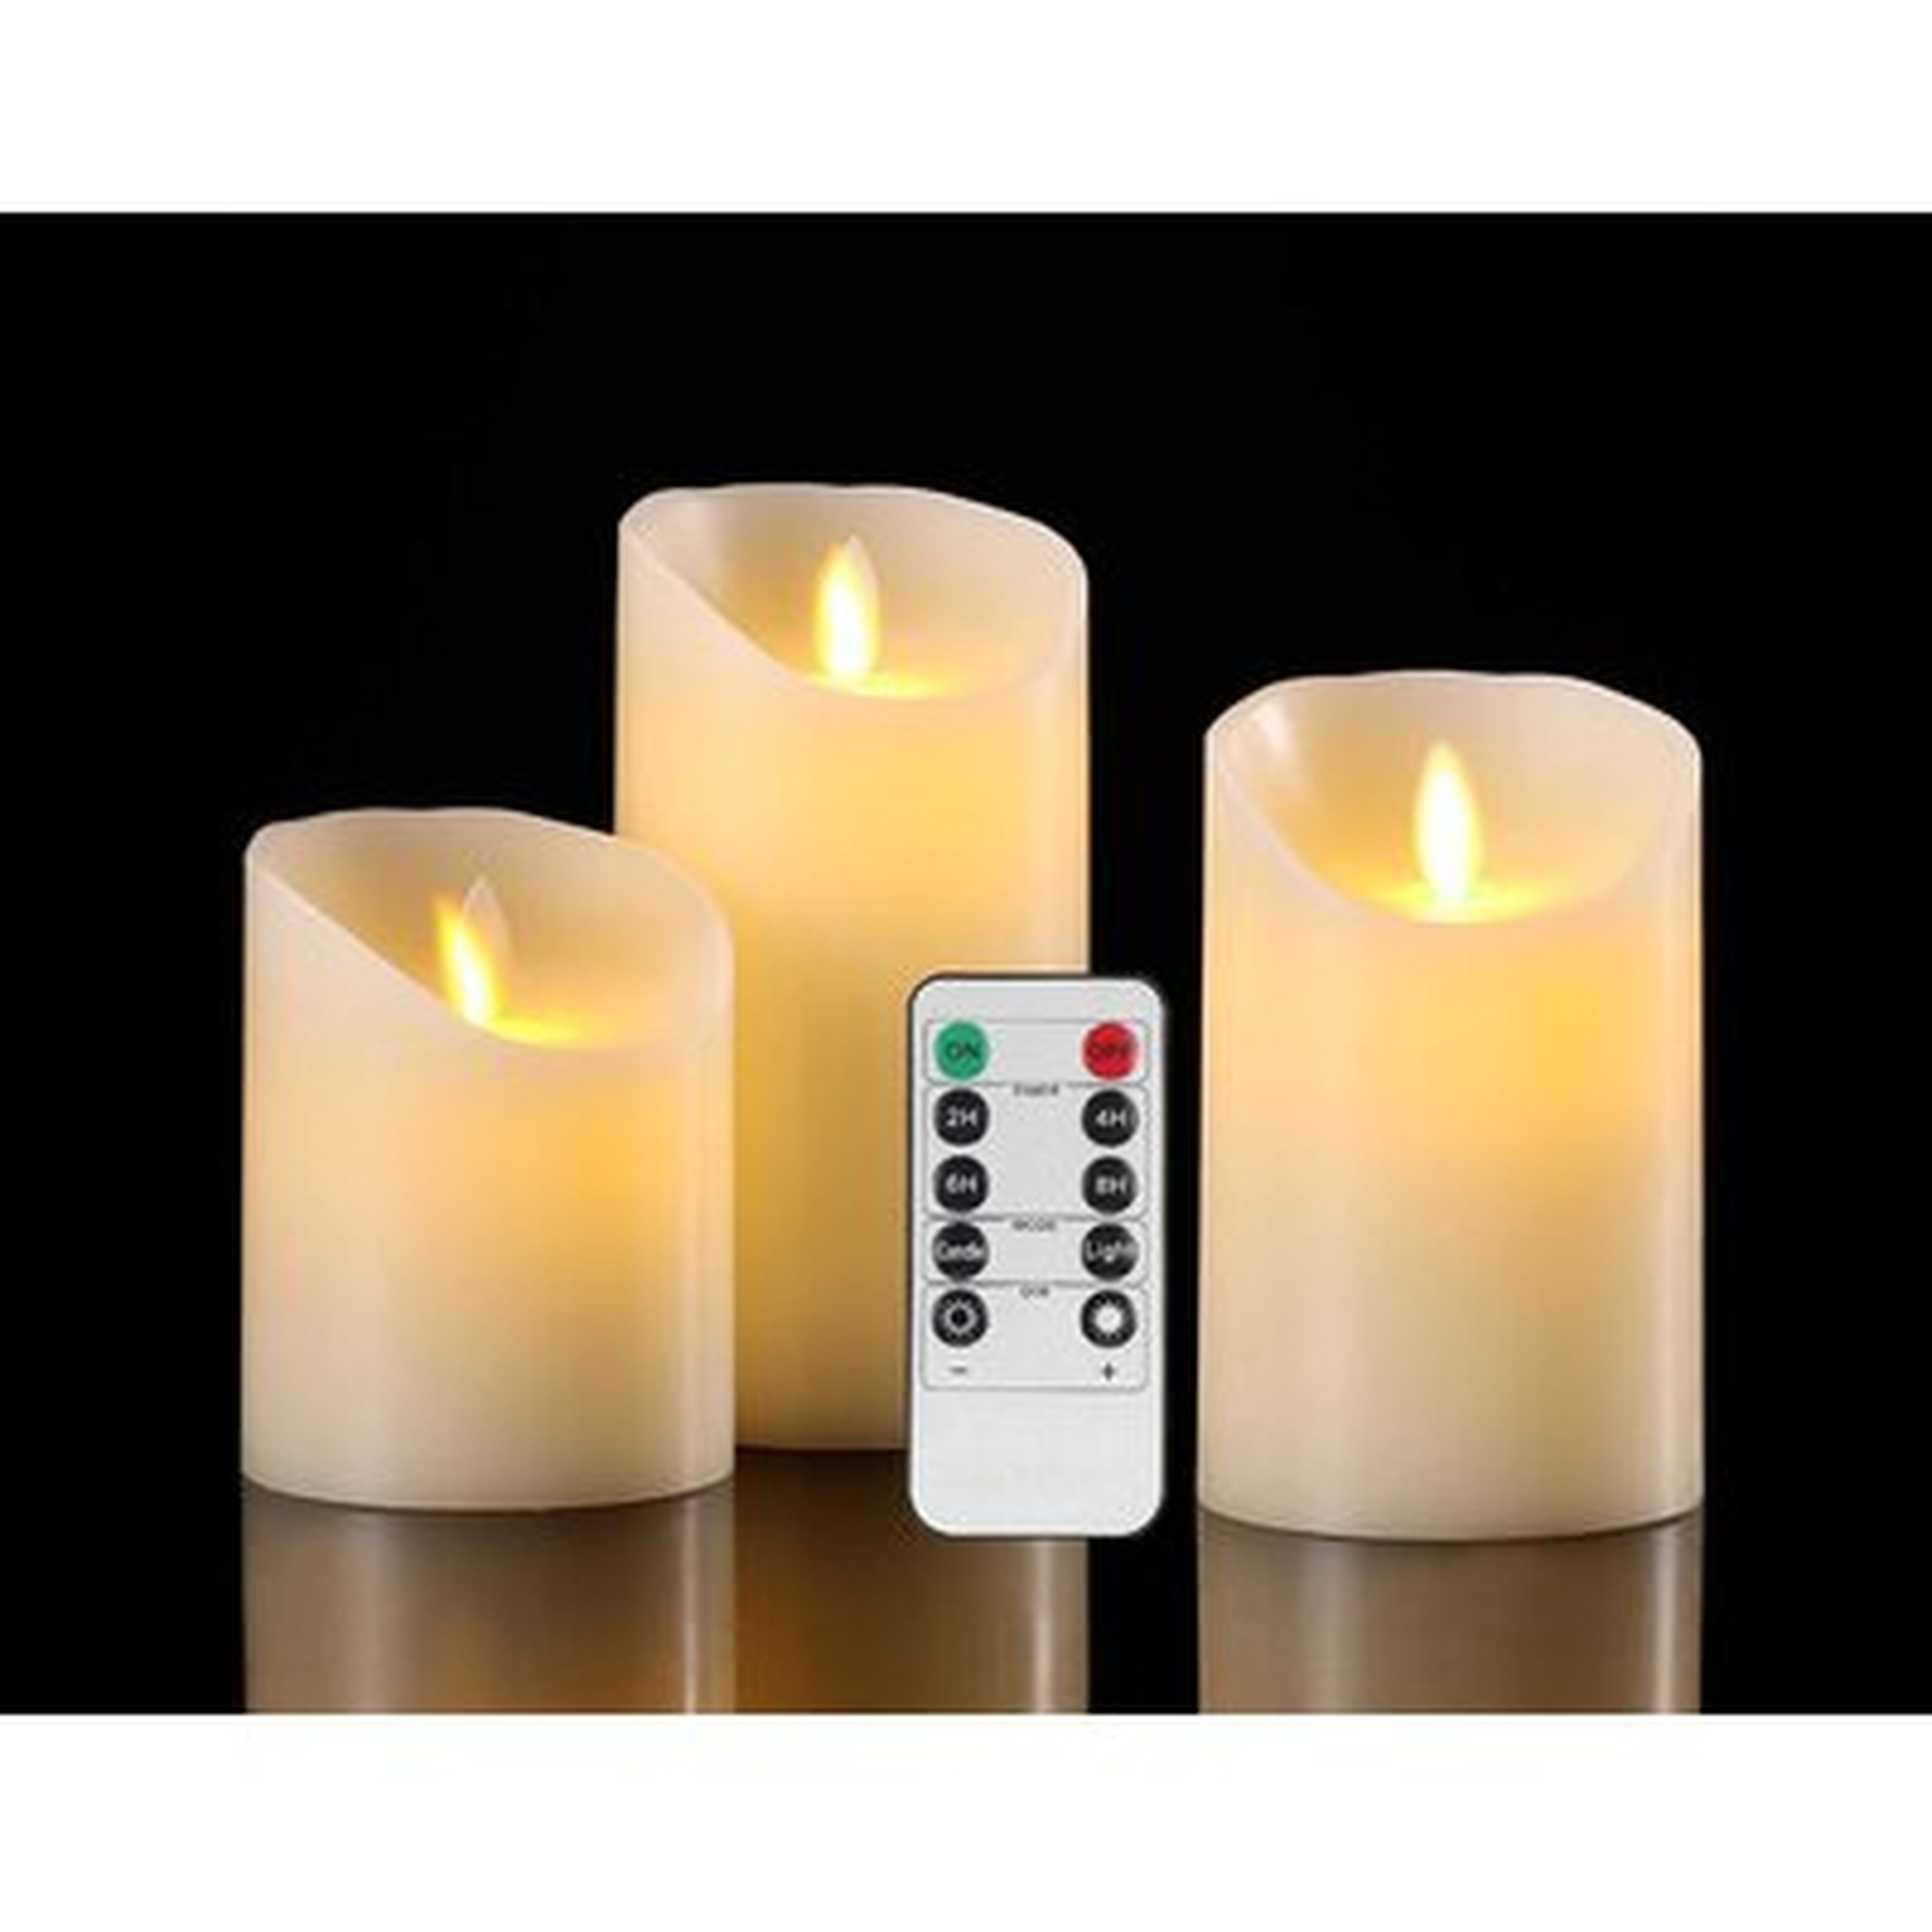 Flameless Candles Battery Operated Pillar Real Wax Flickering Moving Wick Electric LED Candle Sets With Remote Control Cycling 24 Hours Timer - Wayfair